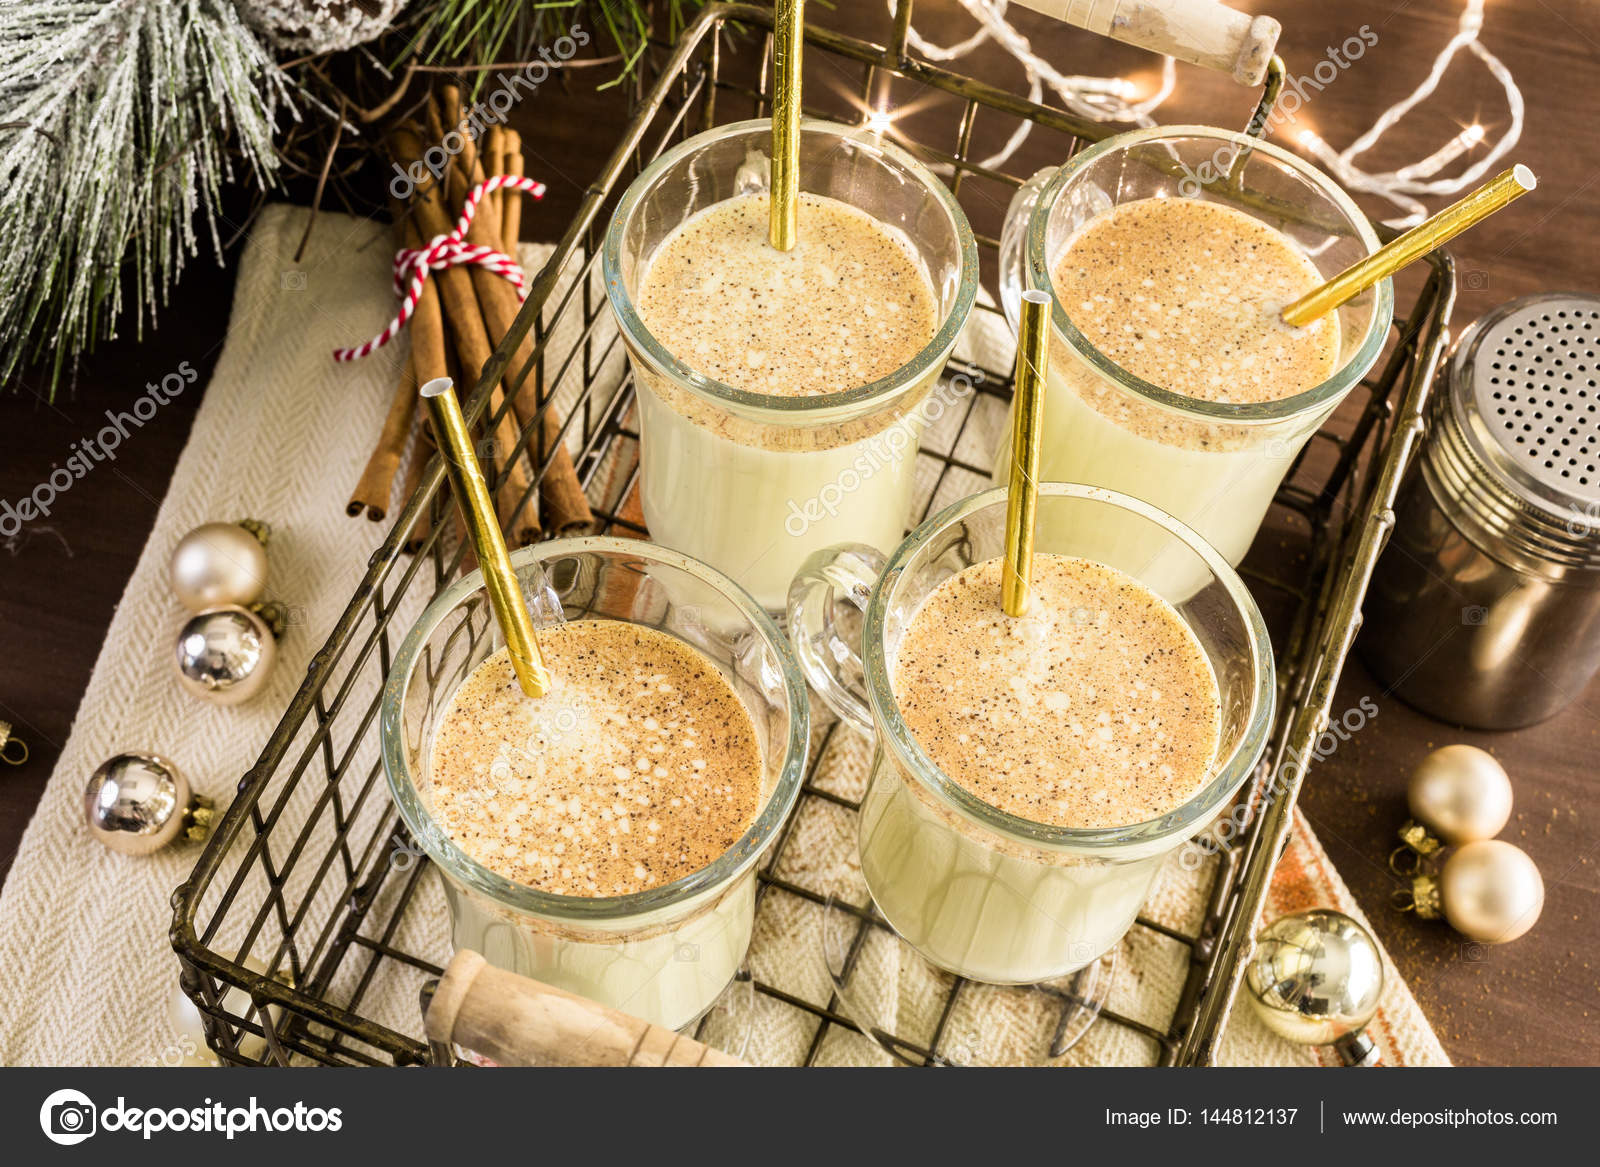 Traditional egg nog drink in glasses Stock Photo by ©urban_light